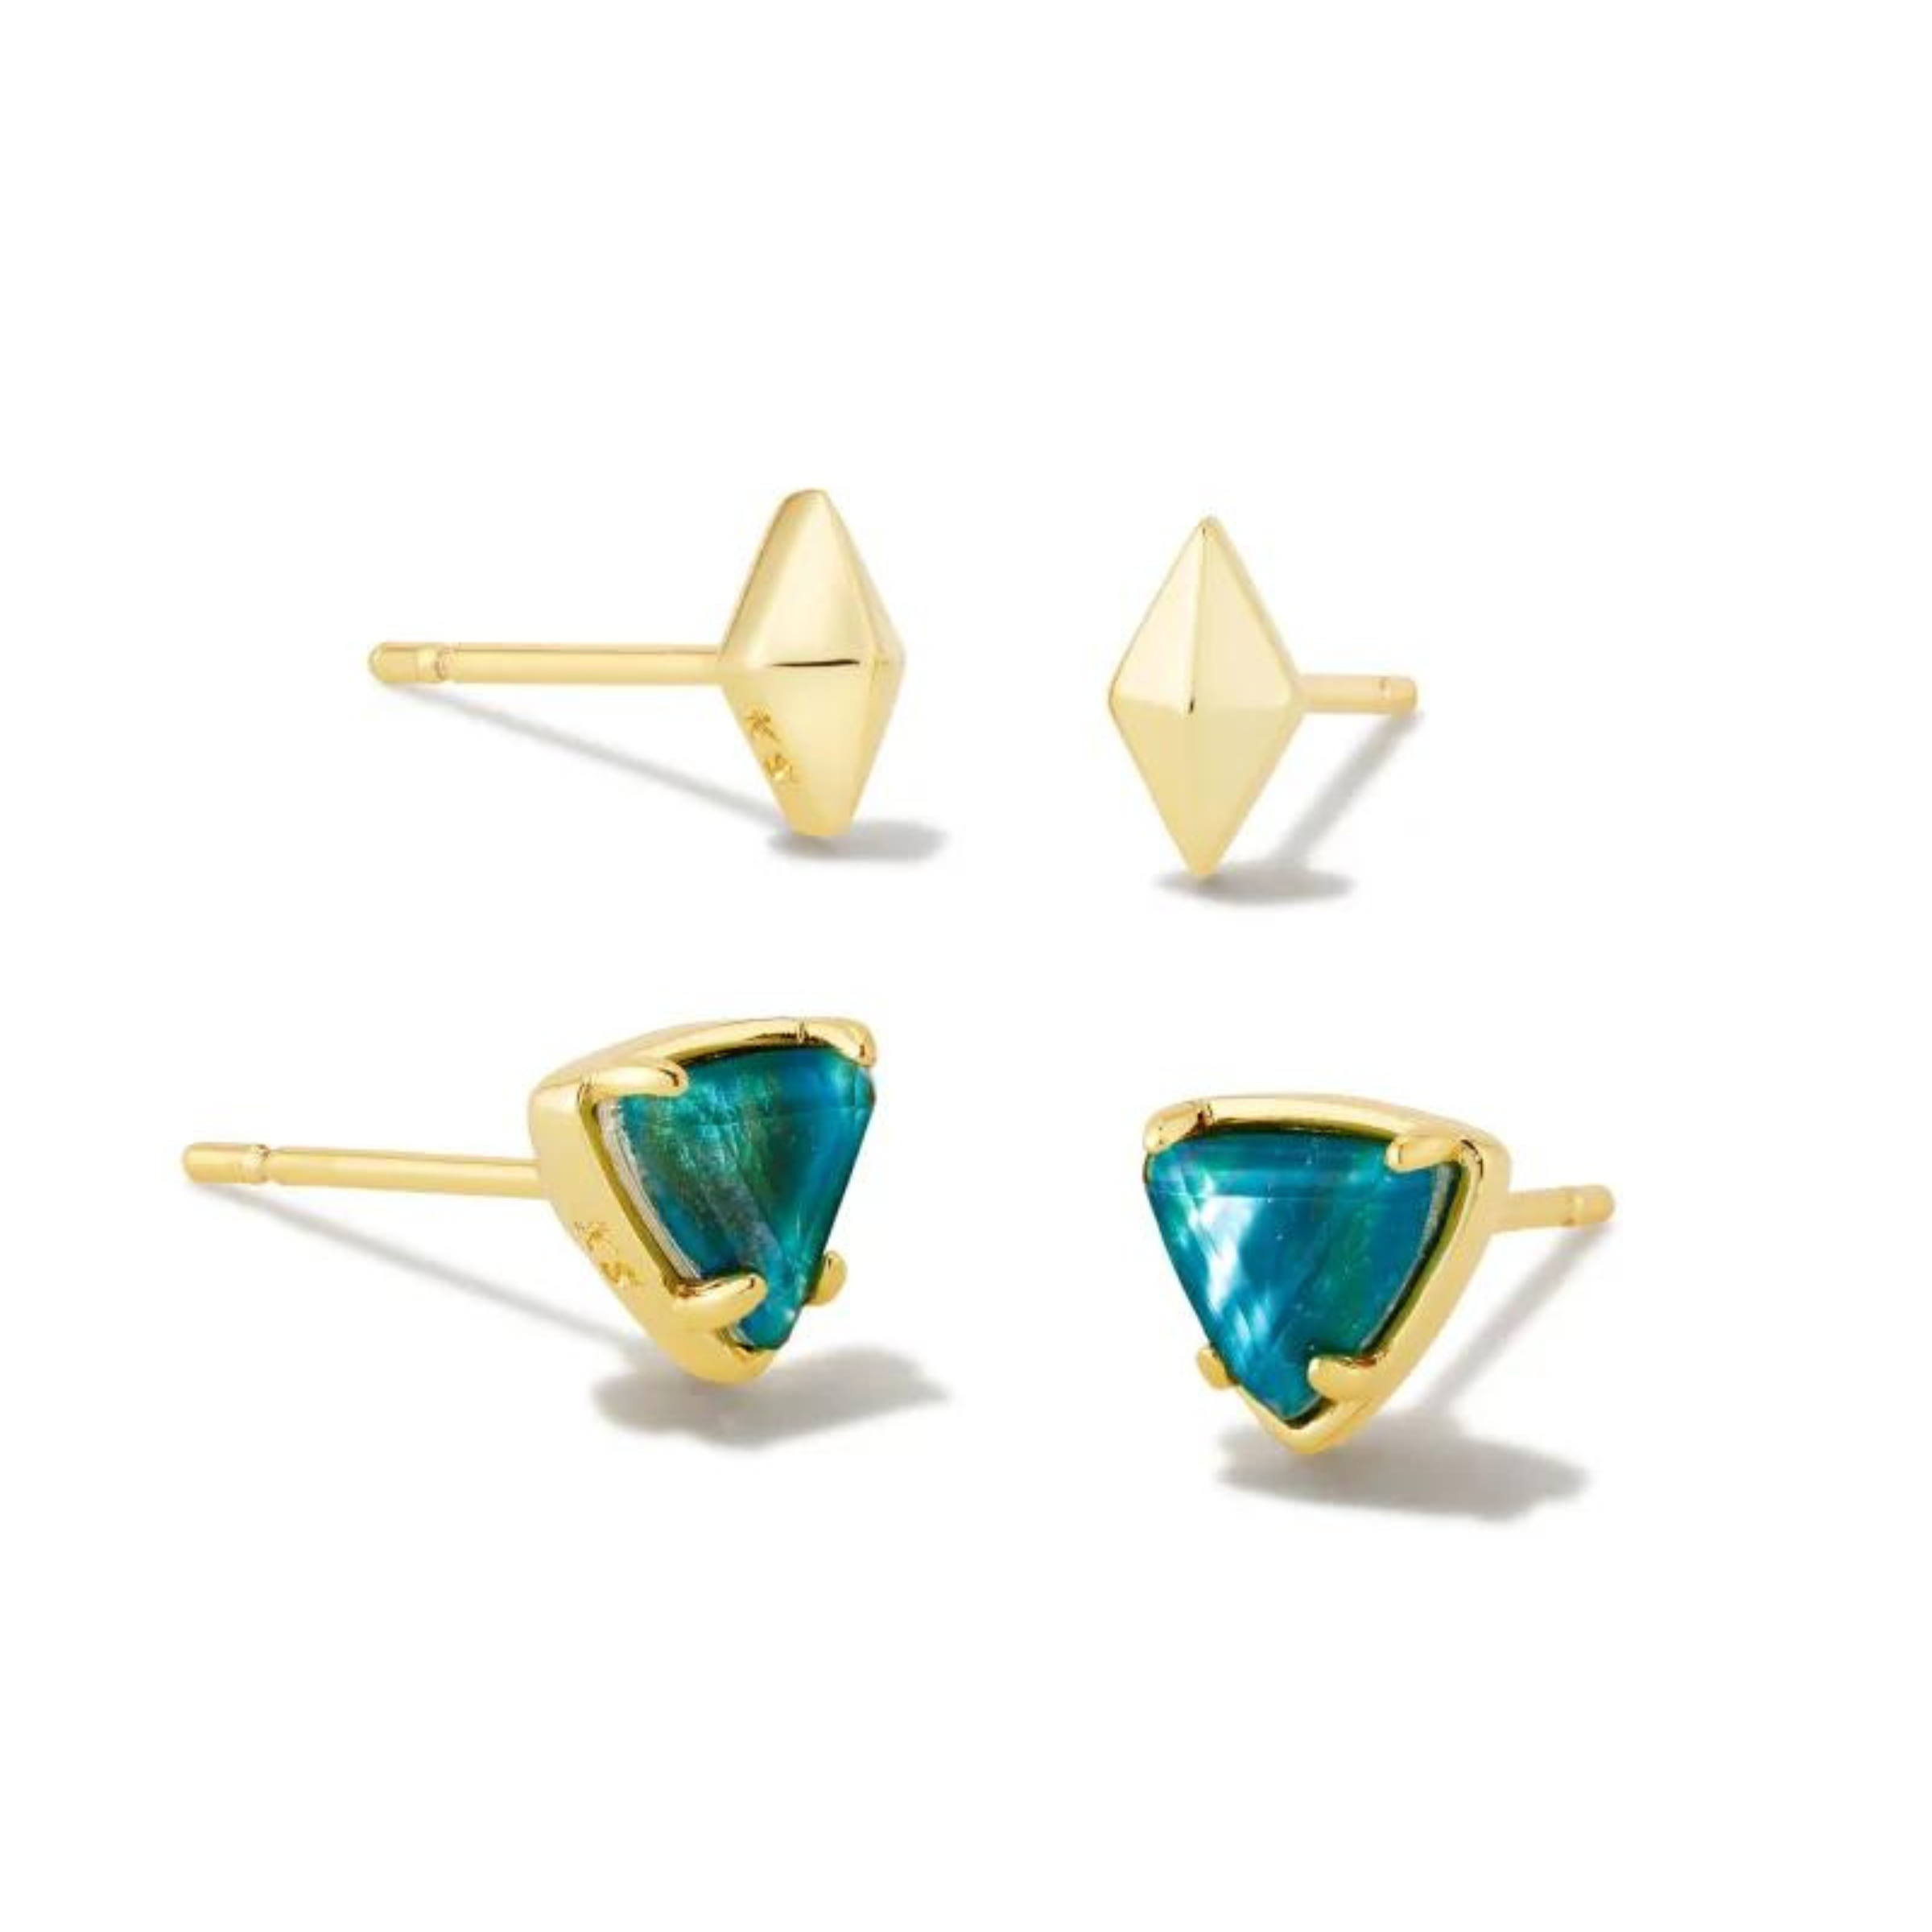 Pictured on a white background are a set of two stud earrings with gold ear posts. The top pair has a gold, diamond shaped stud. The bottom pair are gold triangle studs with teal centers. 